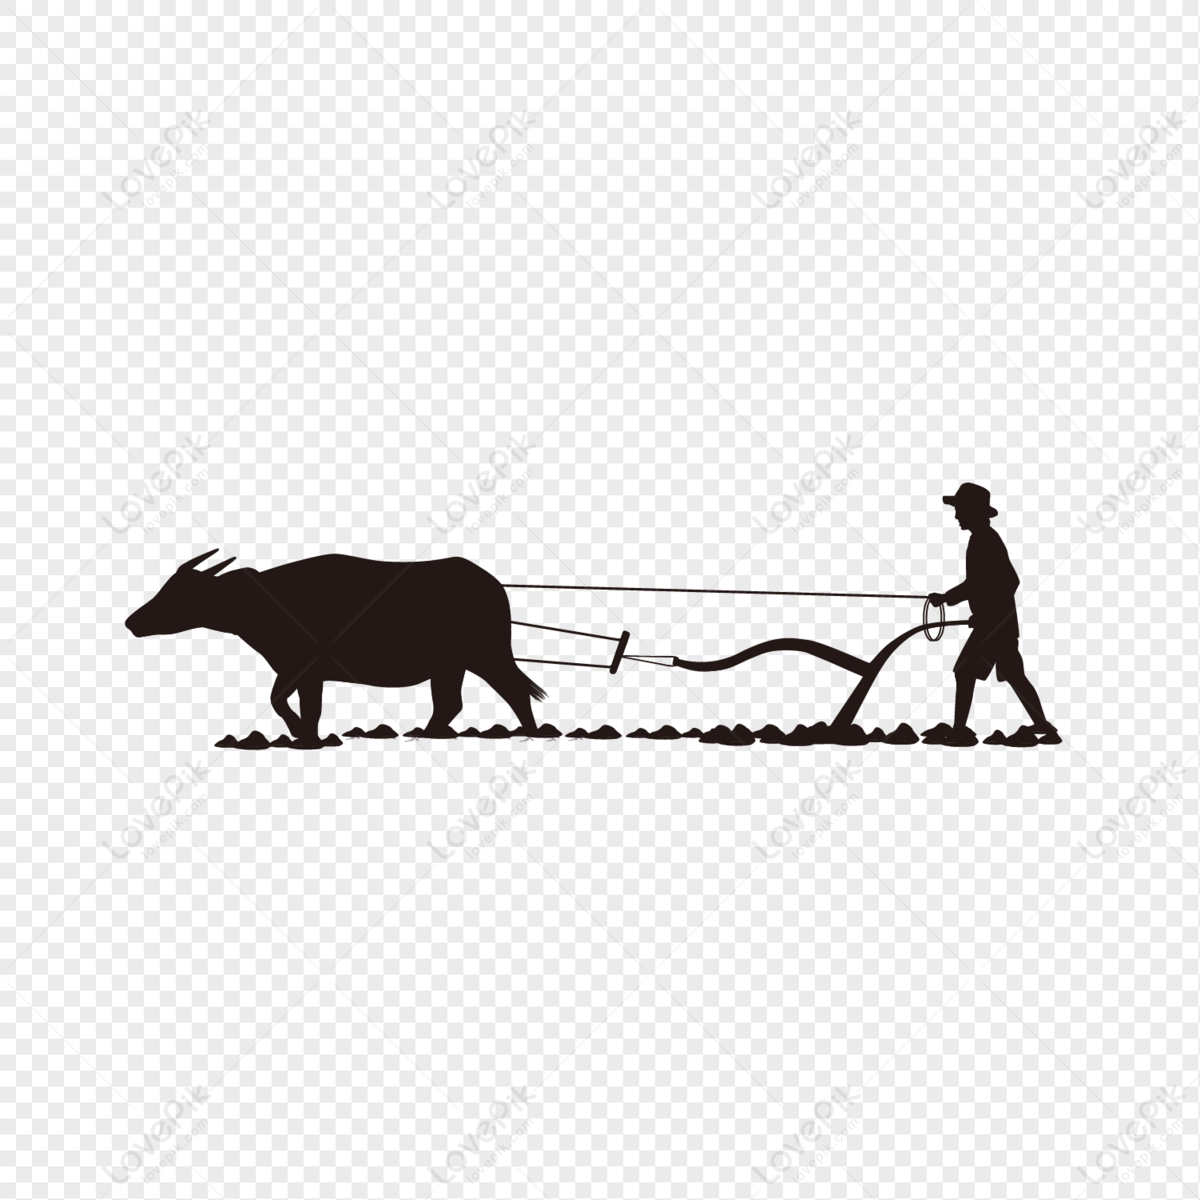 Farmer Ploughing Cattle Cultivated Land Silhouette Elements, Cultivated ...